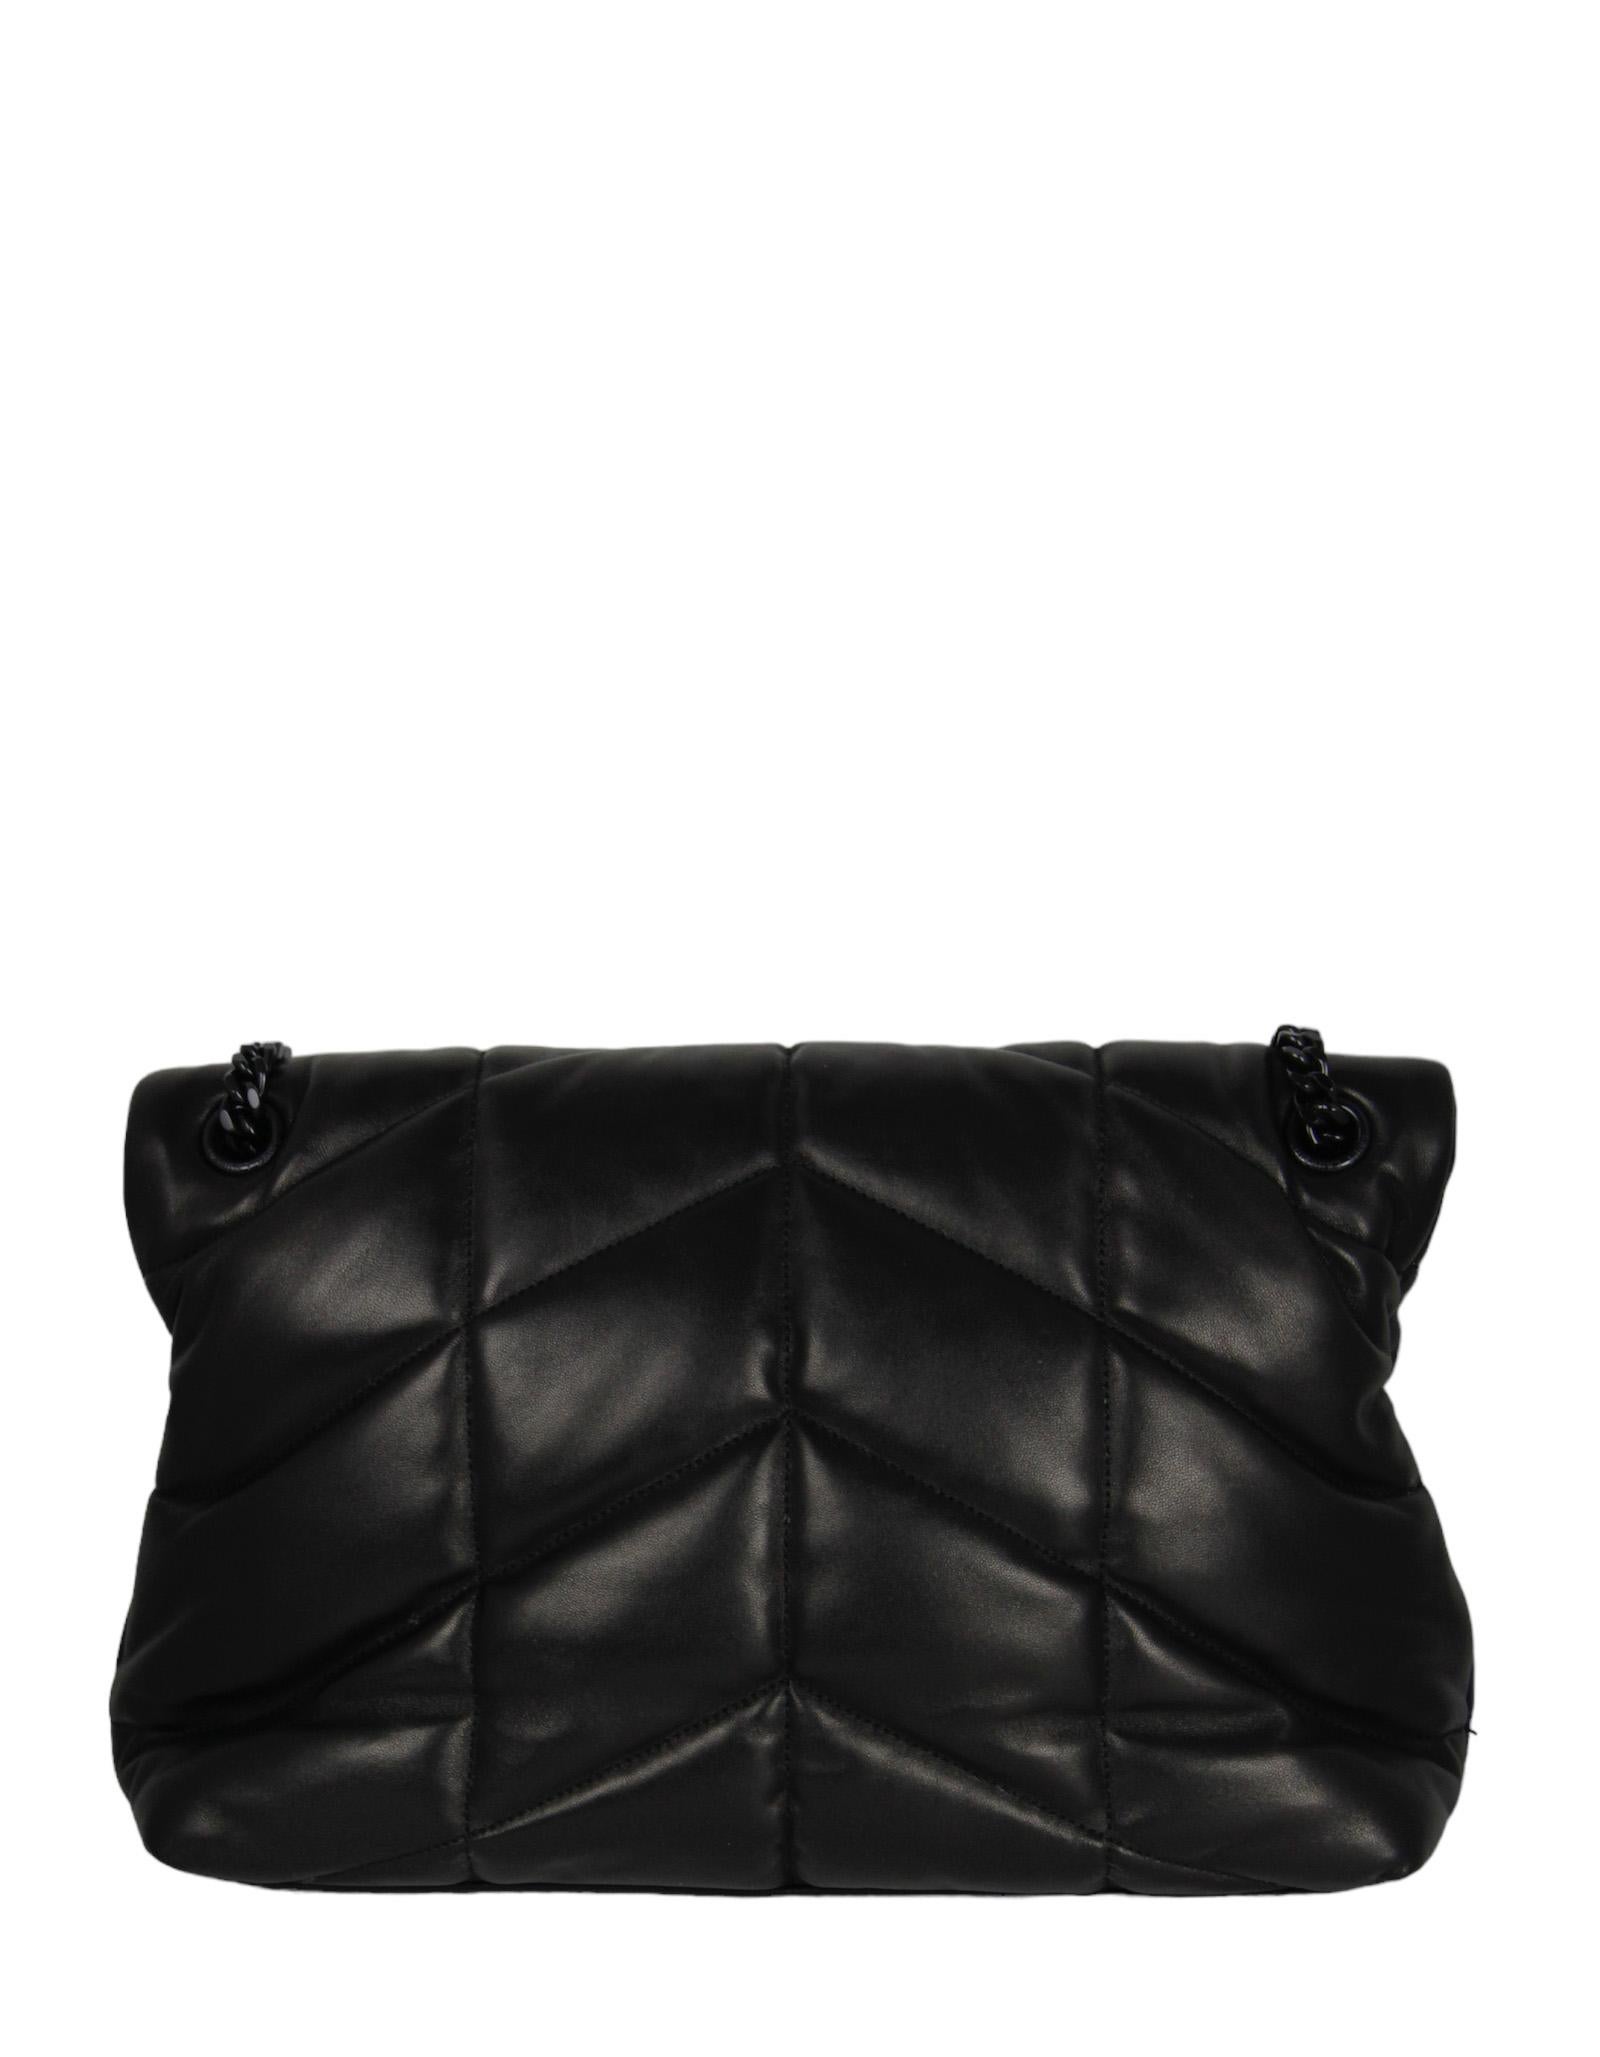 Women's Saint Laurent NEW So Black Leather Small Loulou Puffer Bag rt. $3300 For Sale